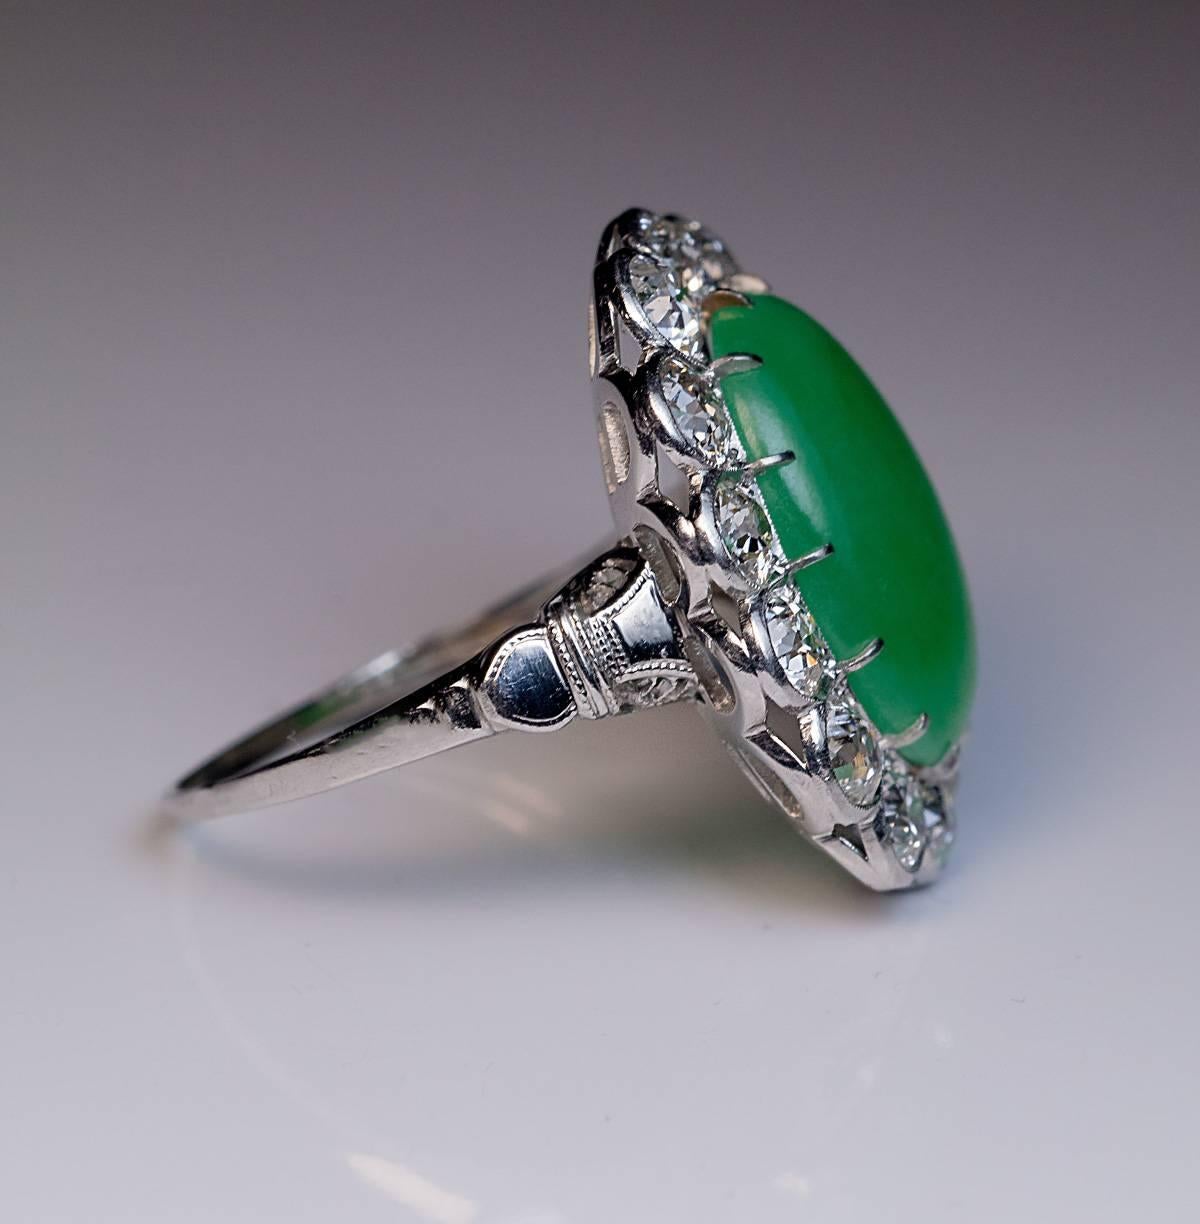 Circa 1925

An 18K white gold ring features a large cabochon cut natural jadeite jade of a soft green color (measuring 16.78 x 11.62 x 4.85 mm, approximately 8 carats) encircled by 14 sparkling old European cut diamonds.

Estimated total diamond